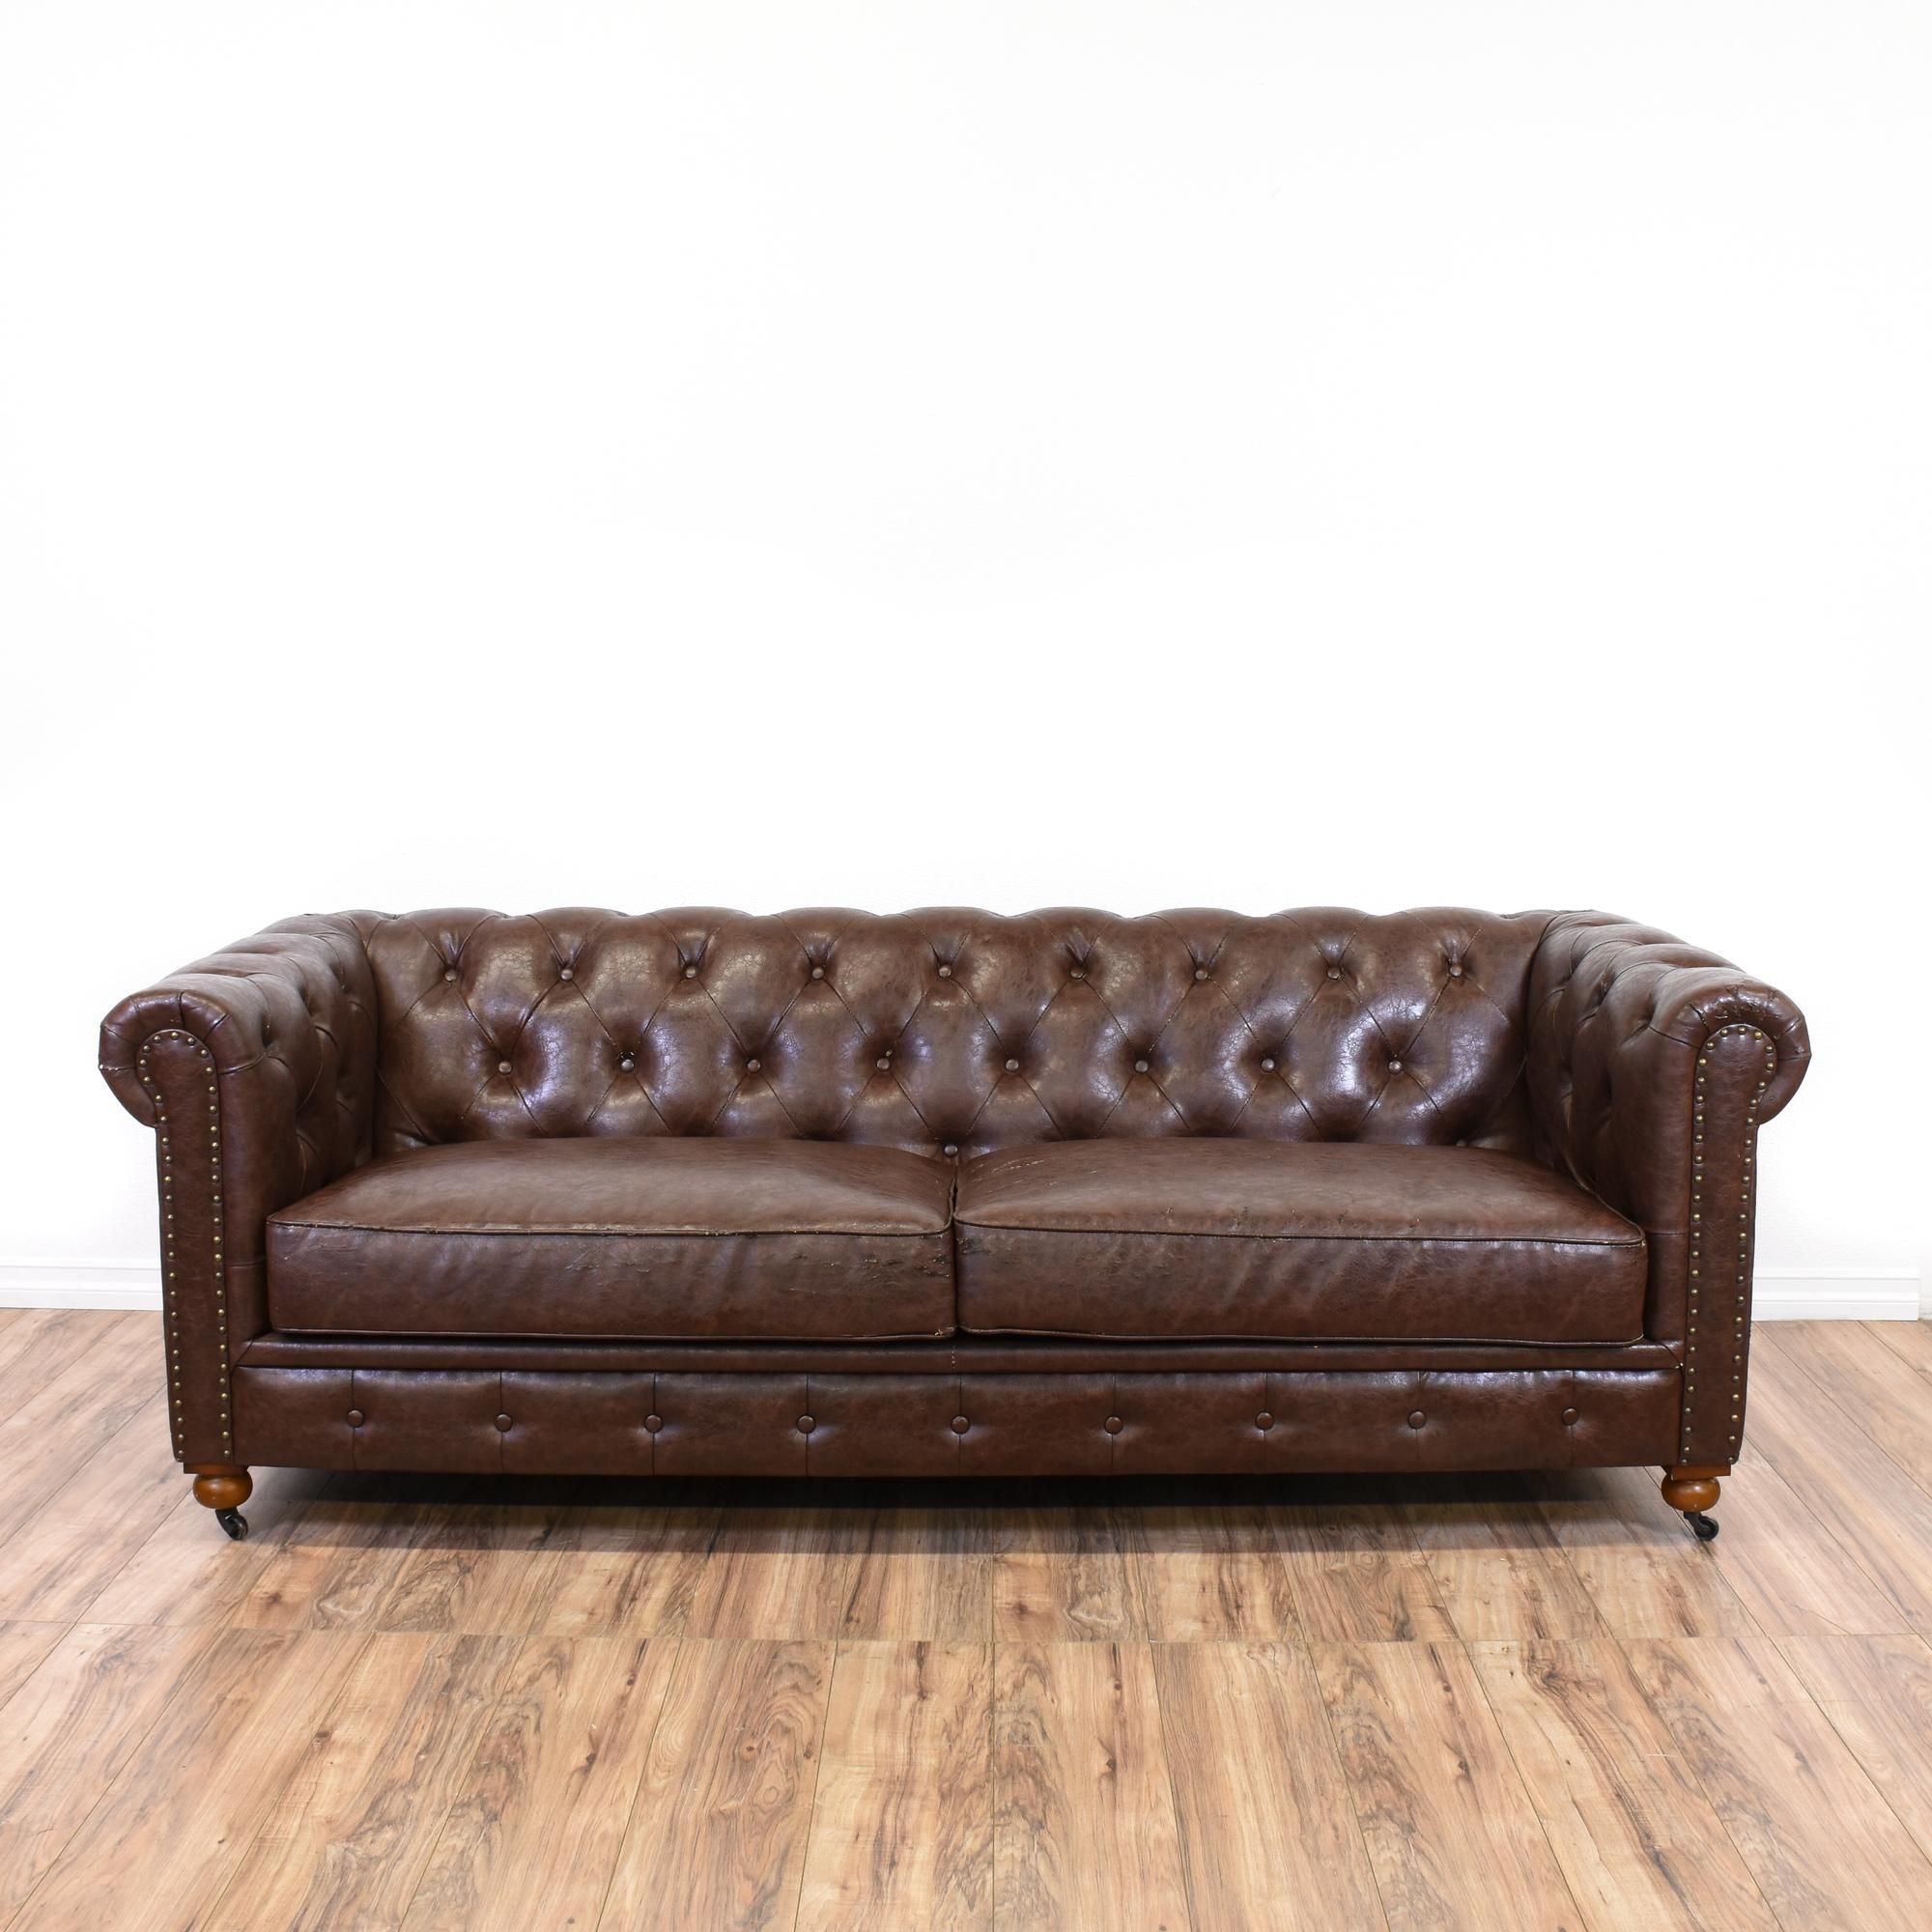 This Chesterfield Sofa Is Upholstered In A Faux Brown Leather With A Within Faux Leather Sofas In Dark Brown (View 9 of 20)